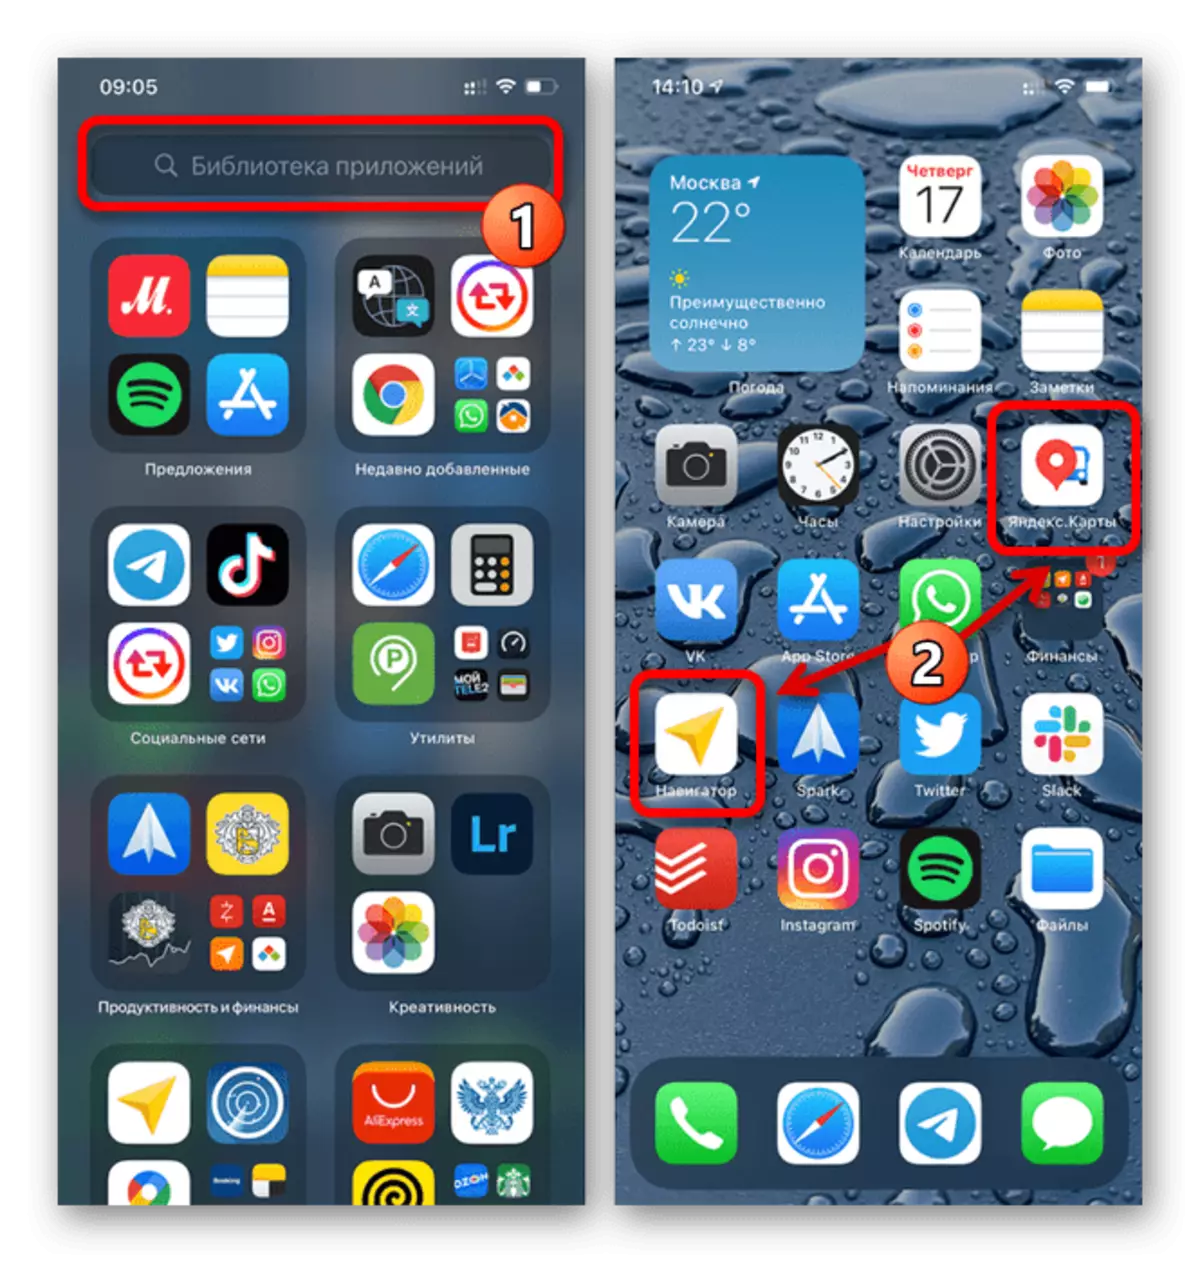 An example of adding Yandex labels to the home screen on the iPhone